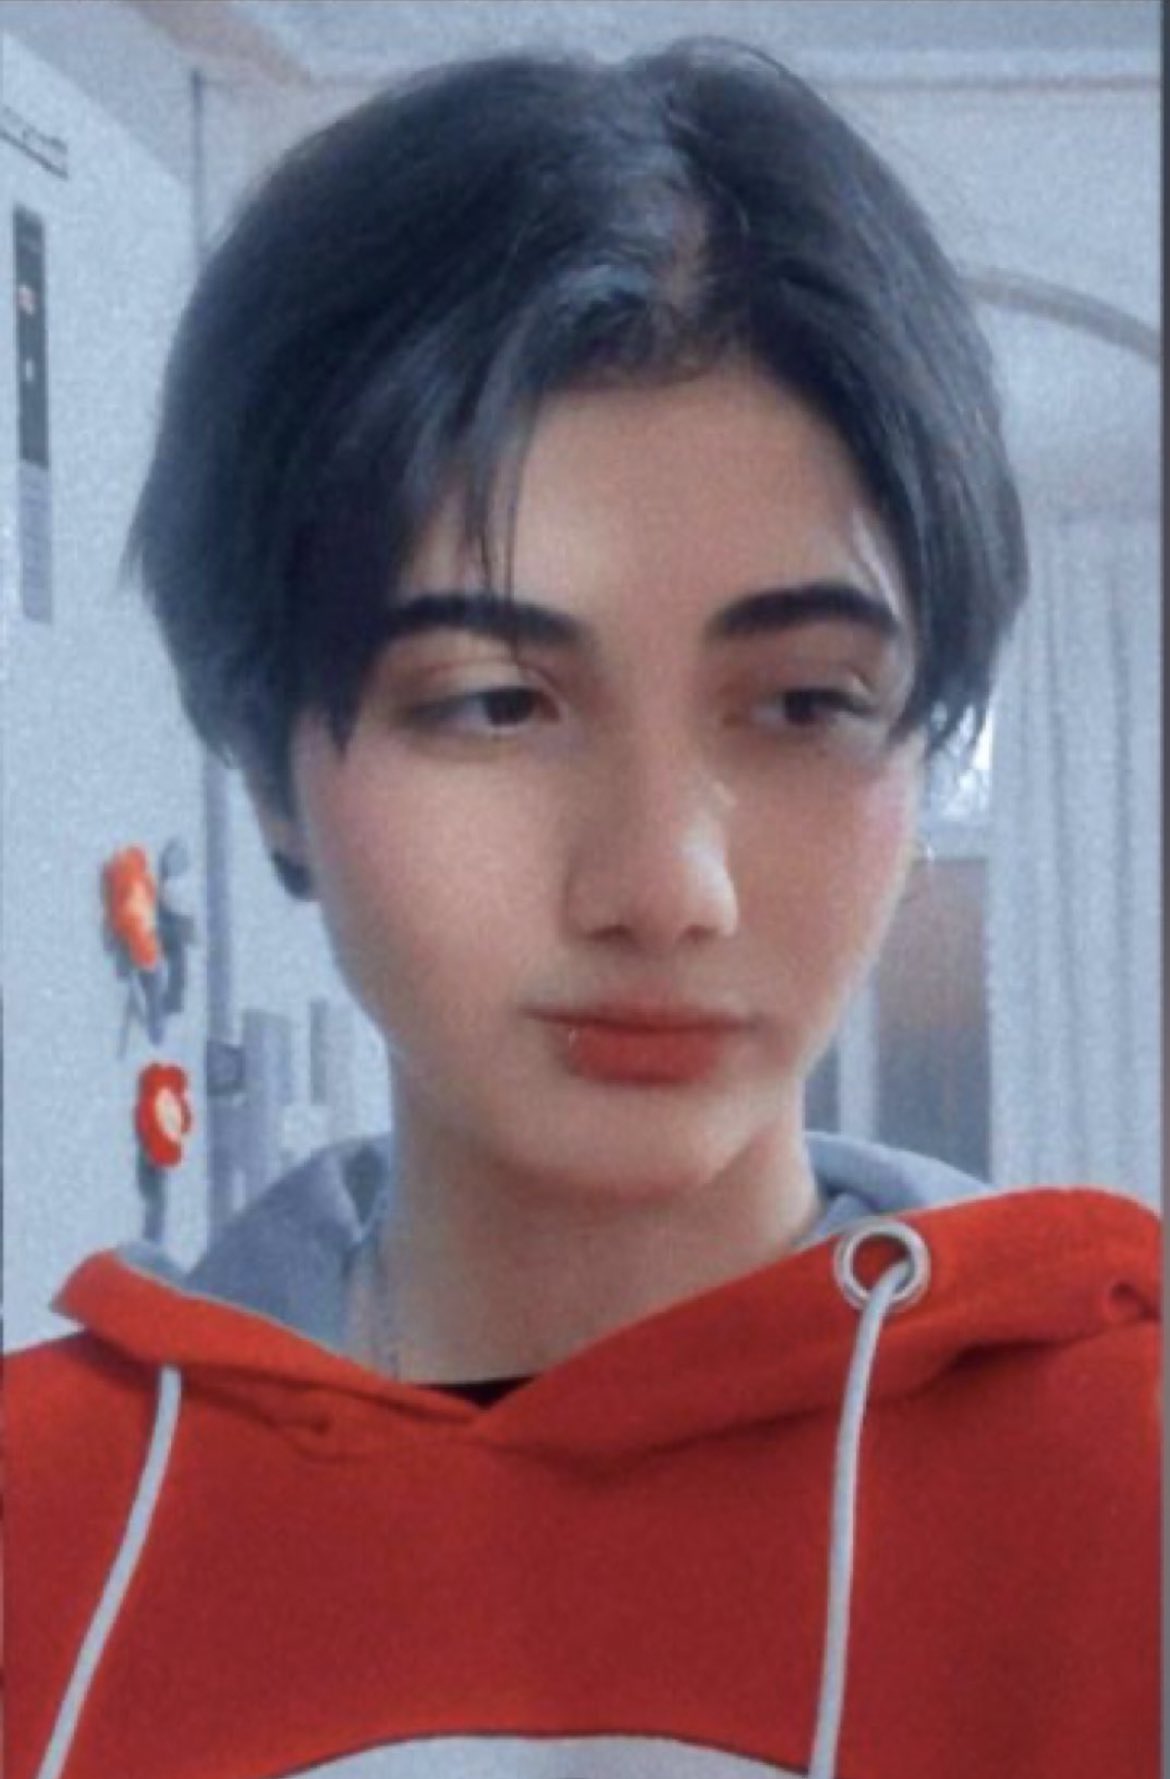 The 16-Year-Old Iranian Girl Who Was Allegedly Beaten Into A Coma By “Morality Police” Has Died